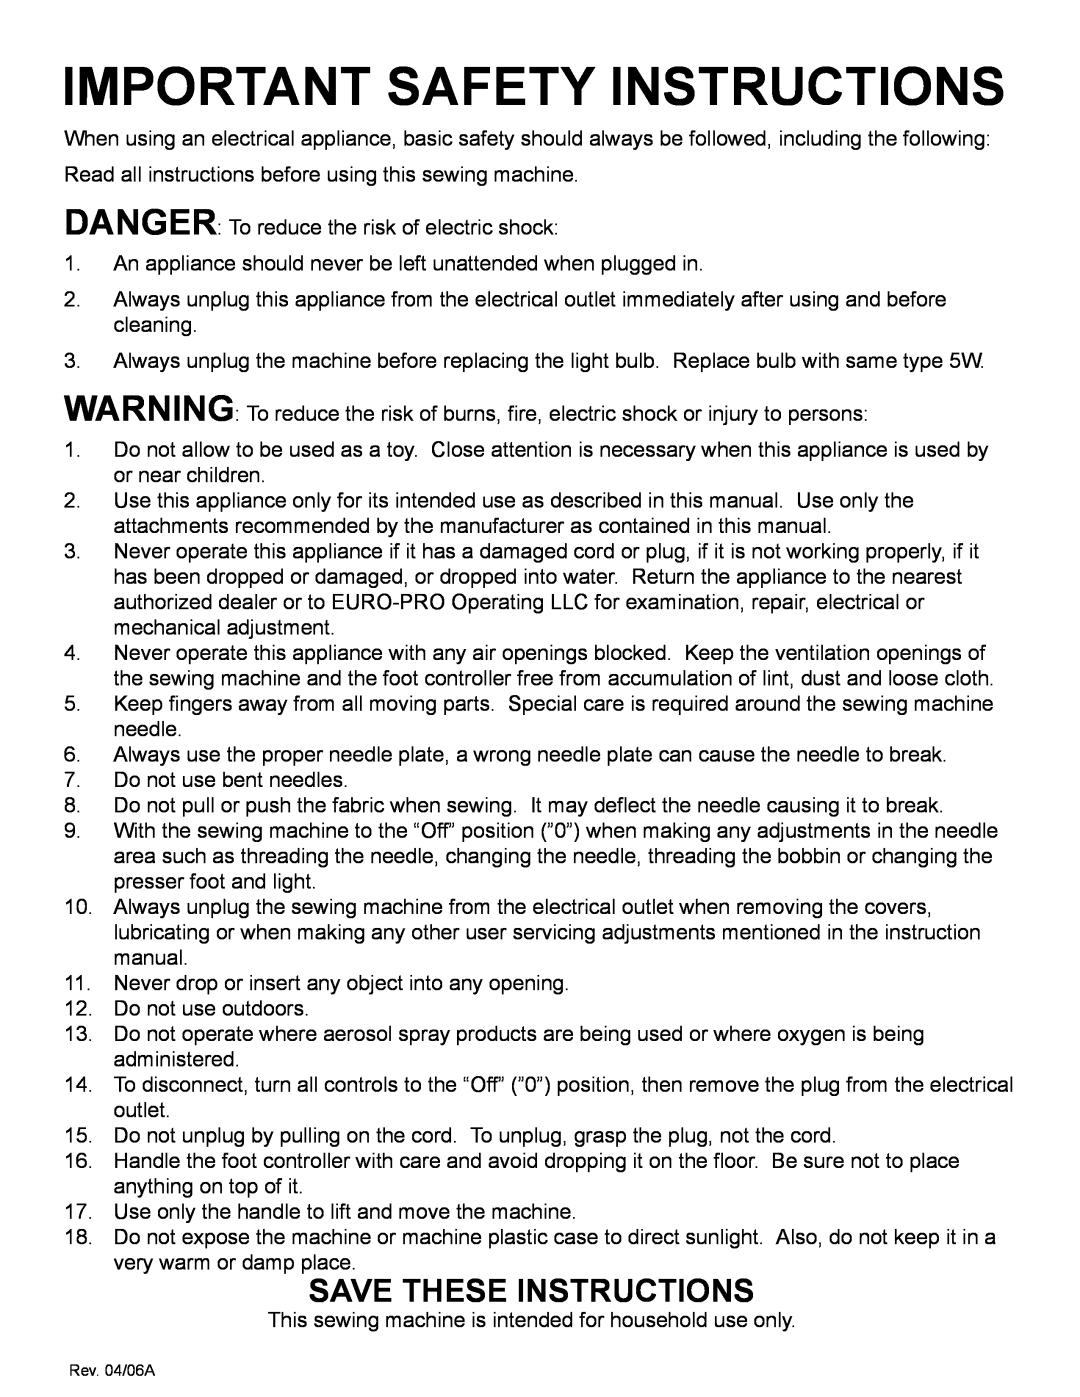 Shark 9015 instruction manual Important Safety Instructions, Save These Instructions 